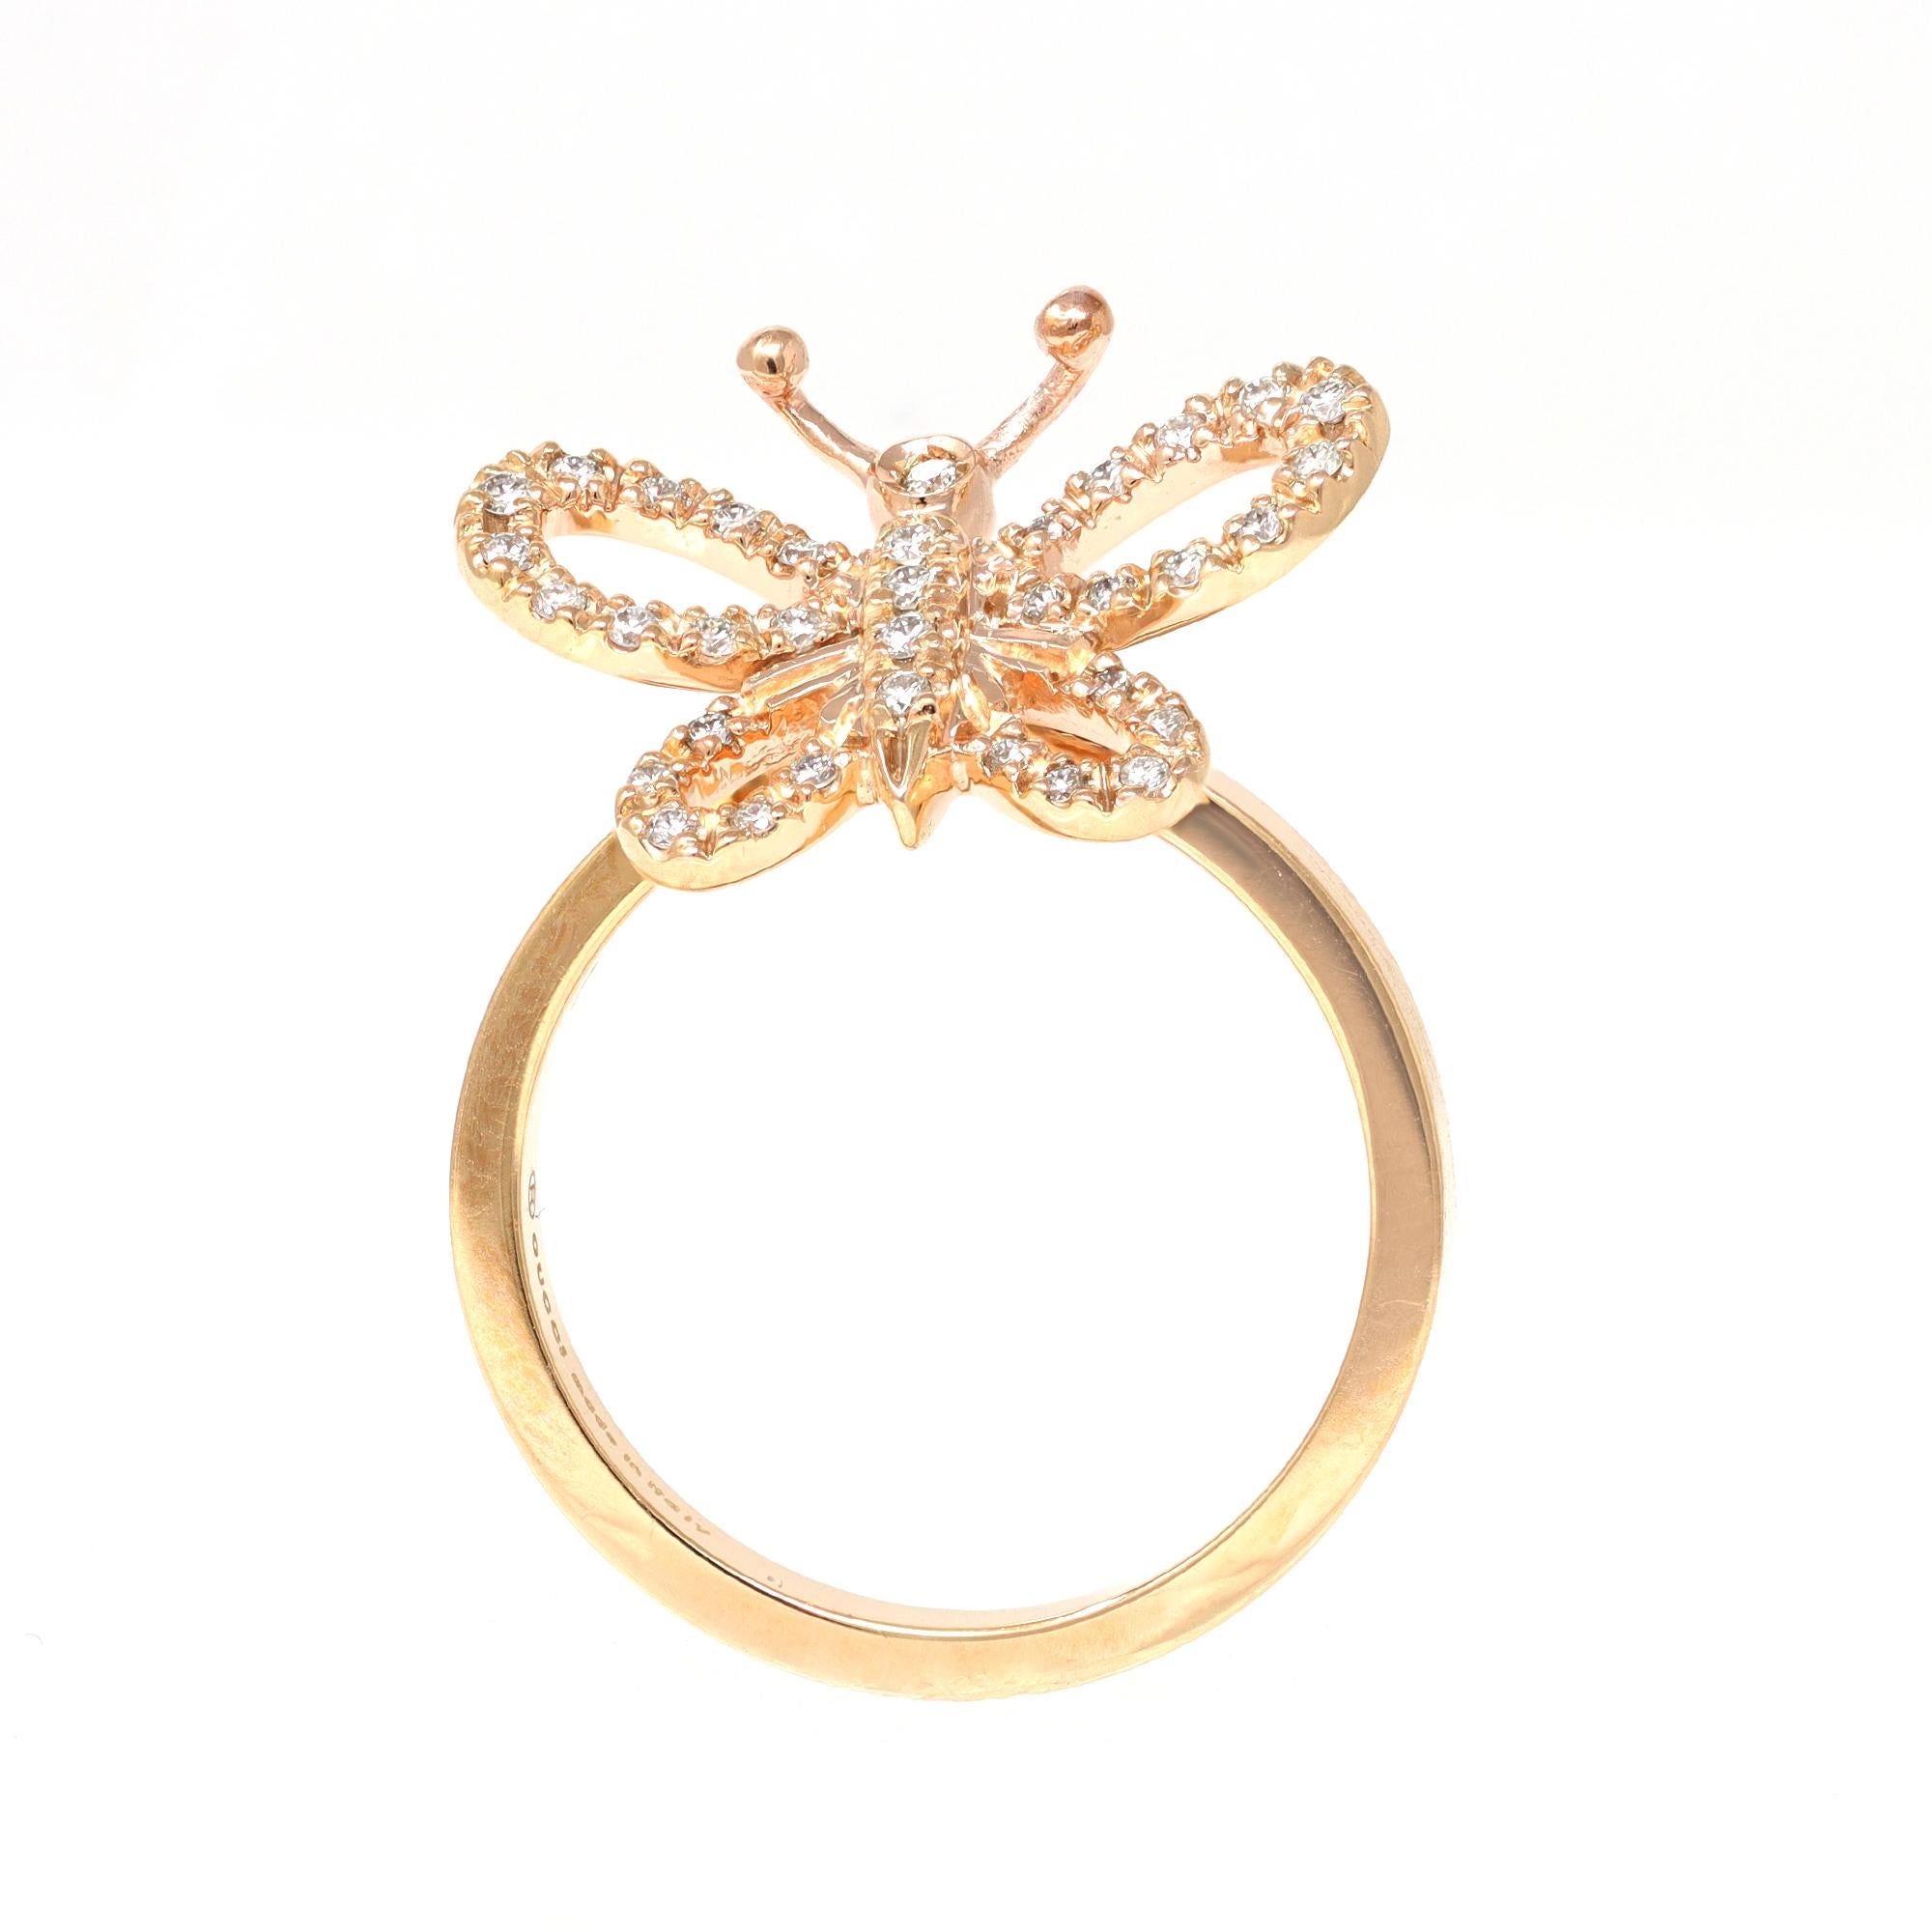 A Modern Gucci Italian Flora Farfalla movable butterfly ring with 0.35 carat of Diamonds, set in 18K gold. The graceful butterfly that adorns the center of the ring is set on a hinge mechanism that allows delicate movement and is accented with clean